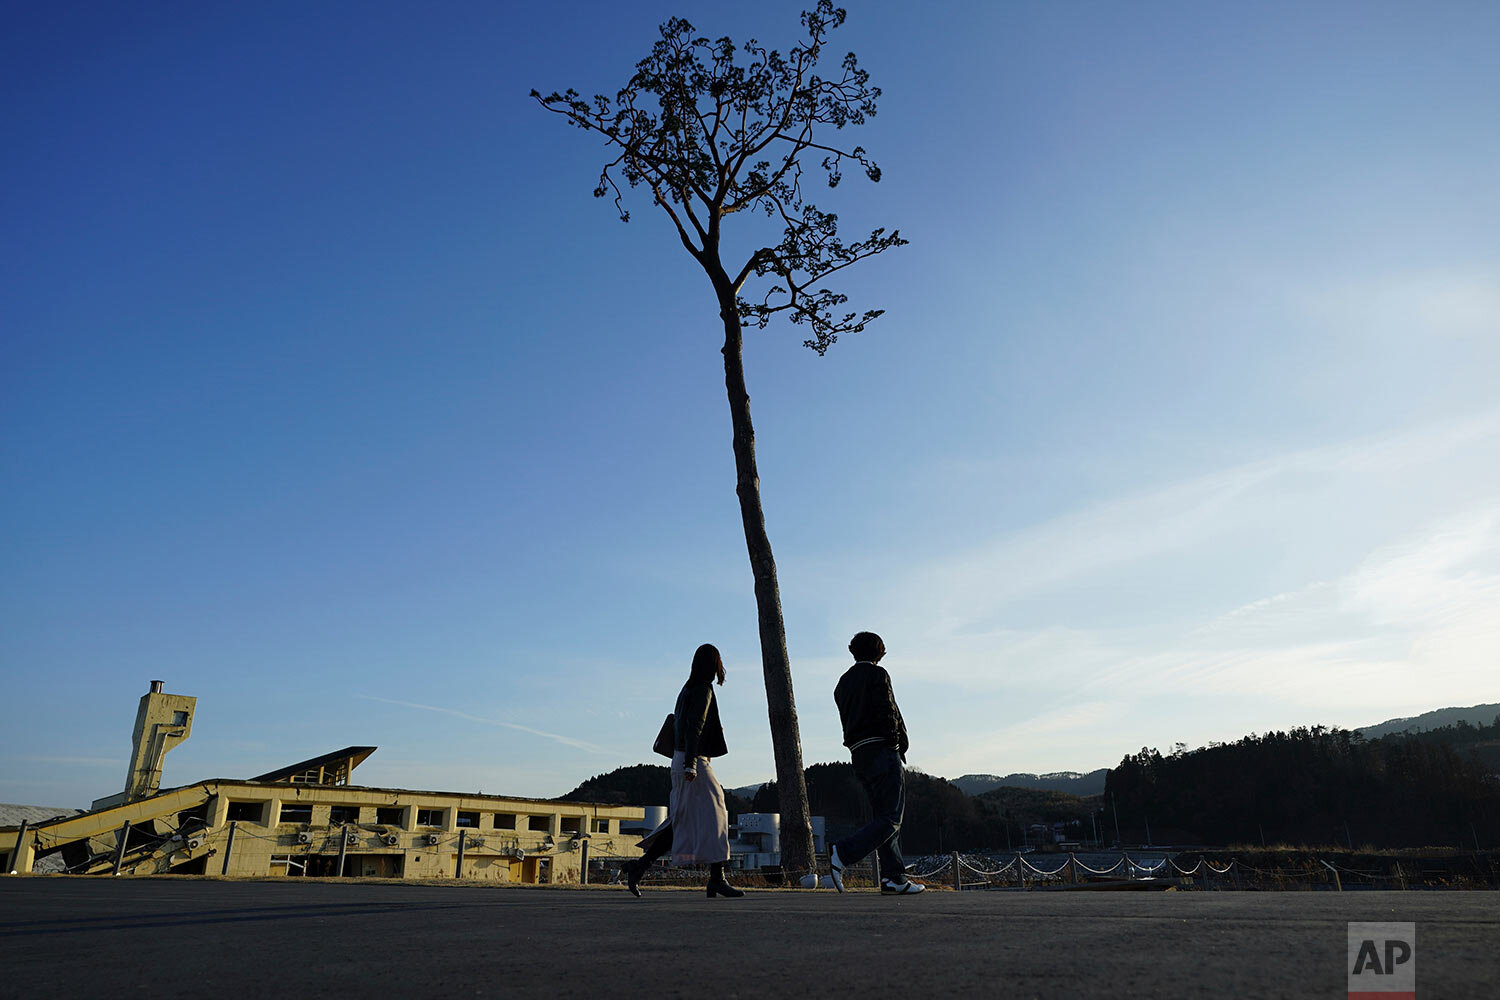  A man and a woman walk near a replica of a lone pine tree that initially survived the 2011 tsunami that flattened the surrounding coastal forest, in Rikuzentakata, Iwate Prefecture, northern Japan Thursday, March 4, 2021. The tree, which eventually 